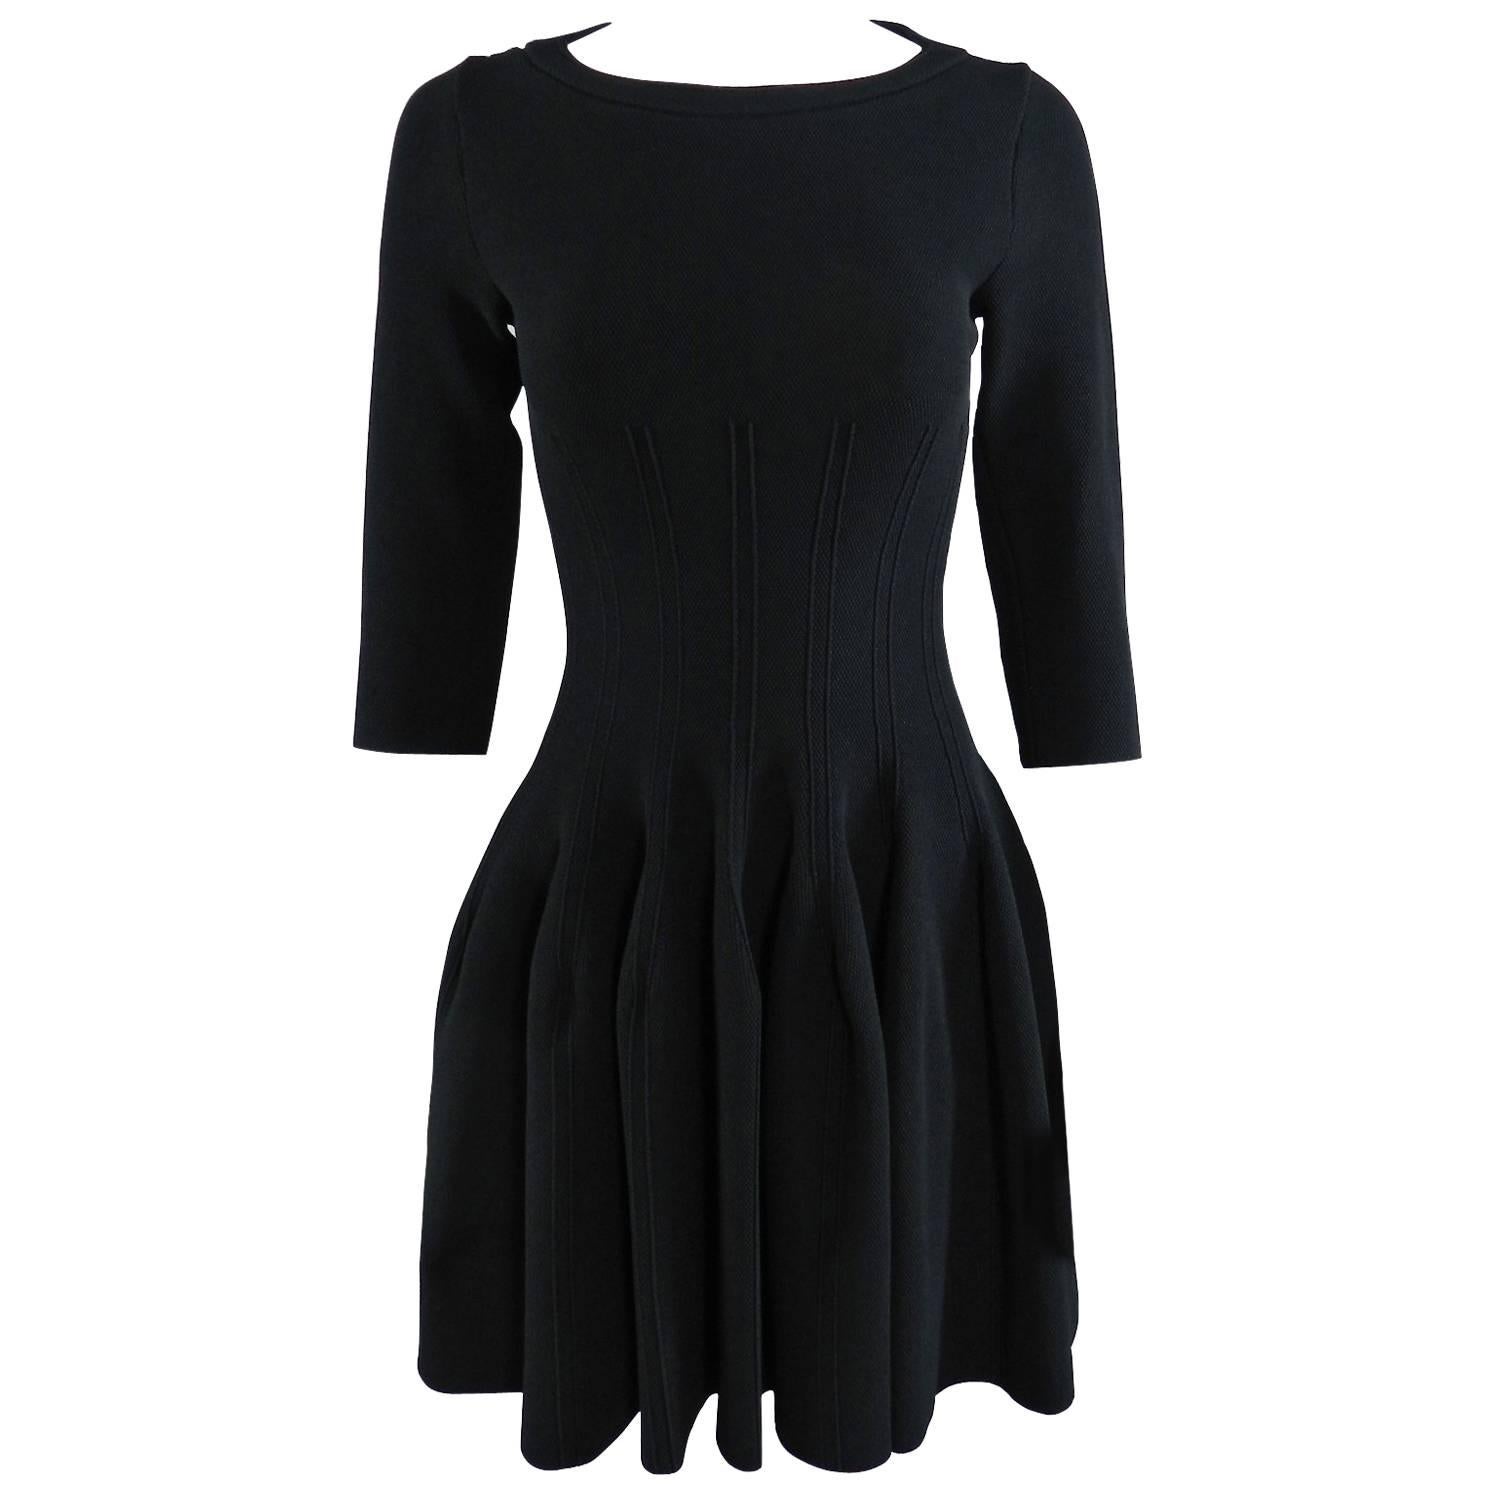 Alaia Black Fit and Flare Skater Bodycon Dress